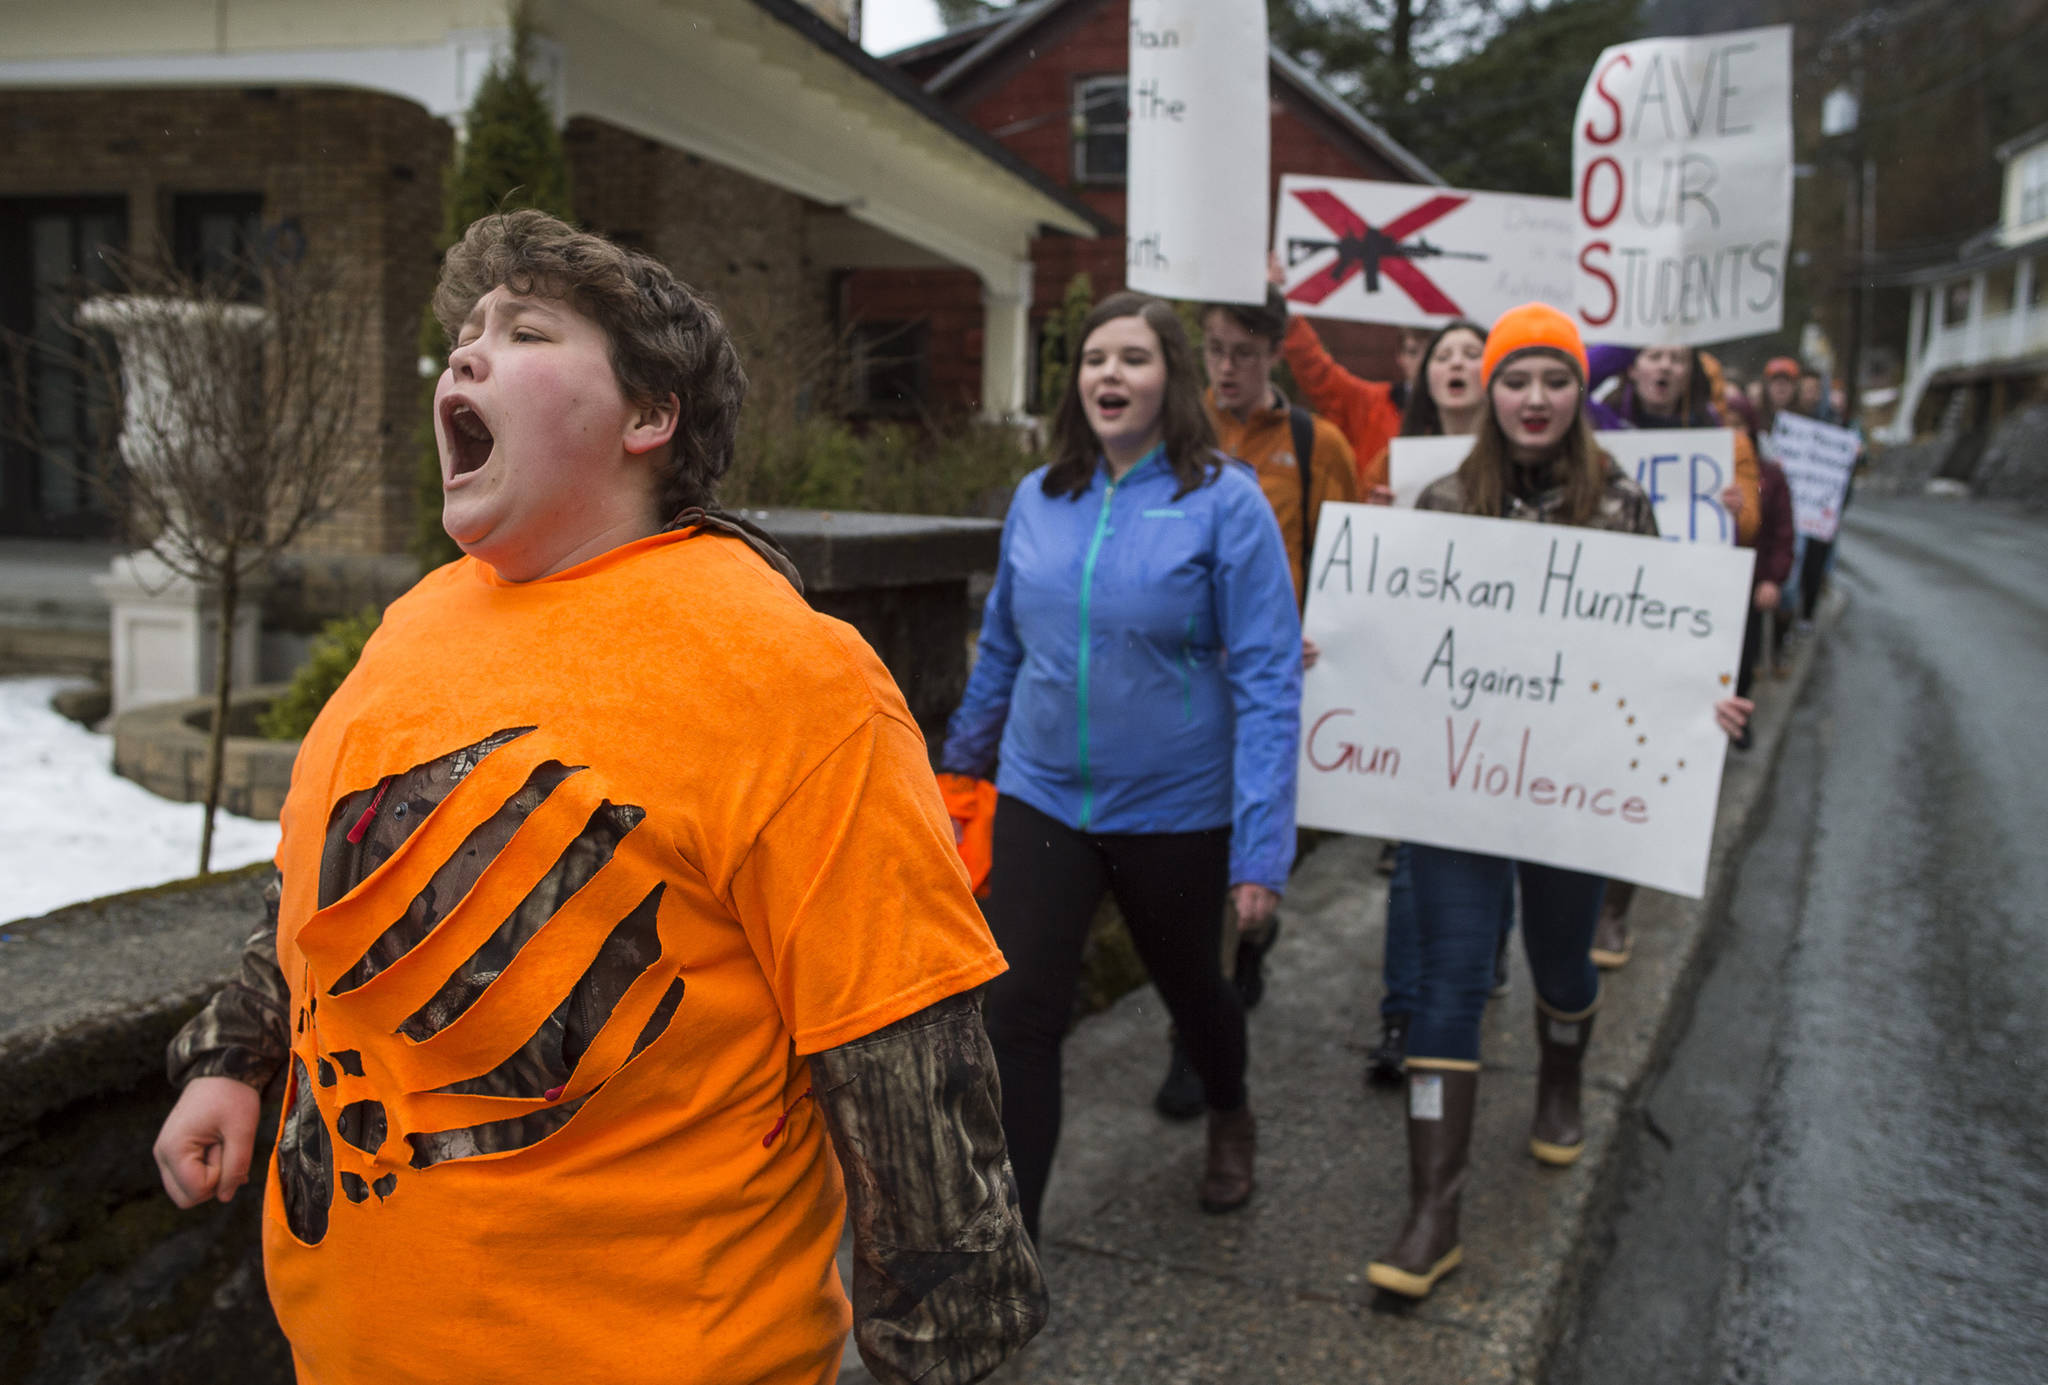 Juneau-Douglas High School student Theo Houck, left, leads a cheer as student participate in the National School Walk Out on Wednesday, March 14, 2018. The students marched from school to the Capitol in support of the 17 victims of the Marjory Stoneman Douglas High School shooting one month ago. (Michael Penn | Juneau Empire)